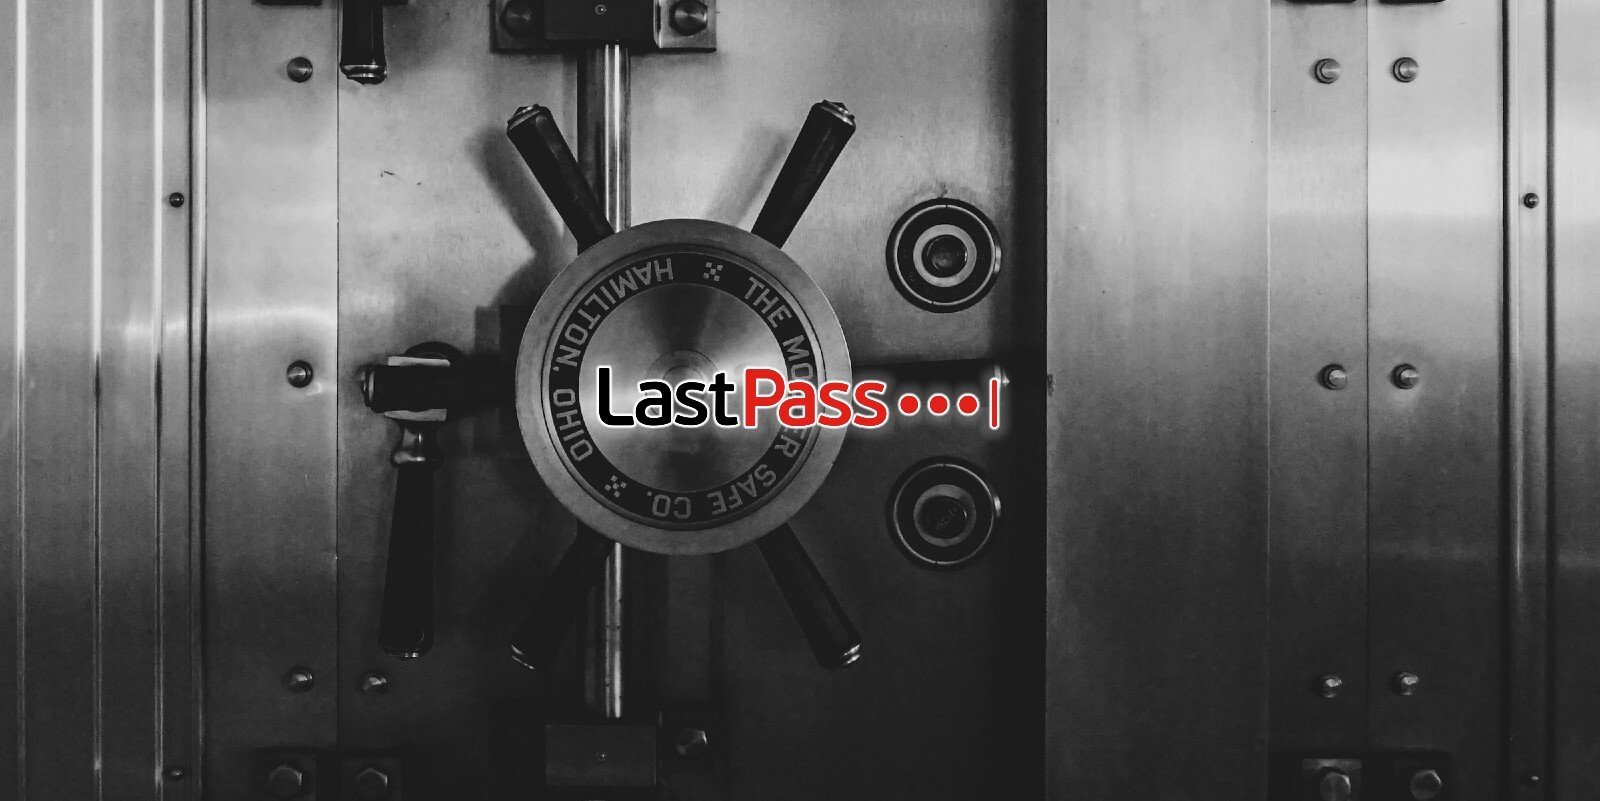 Fake LastPass password manager spotted on Apple’s App Store